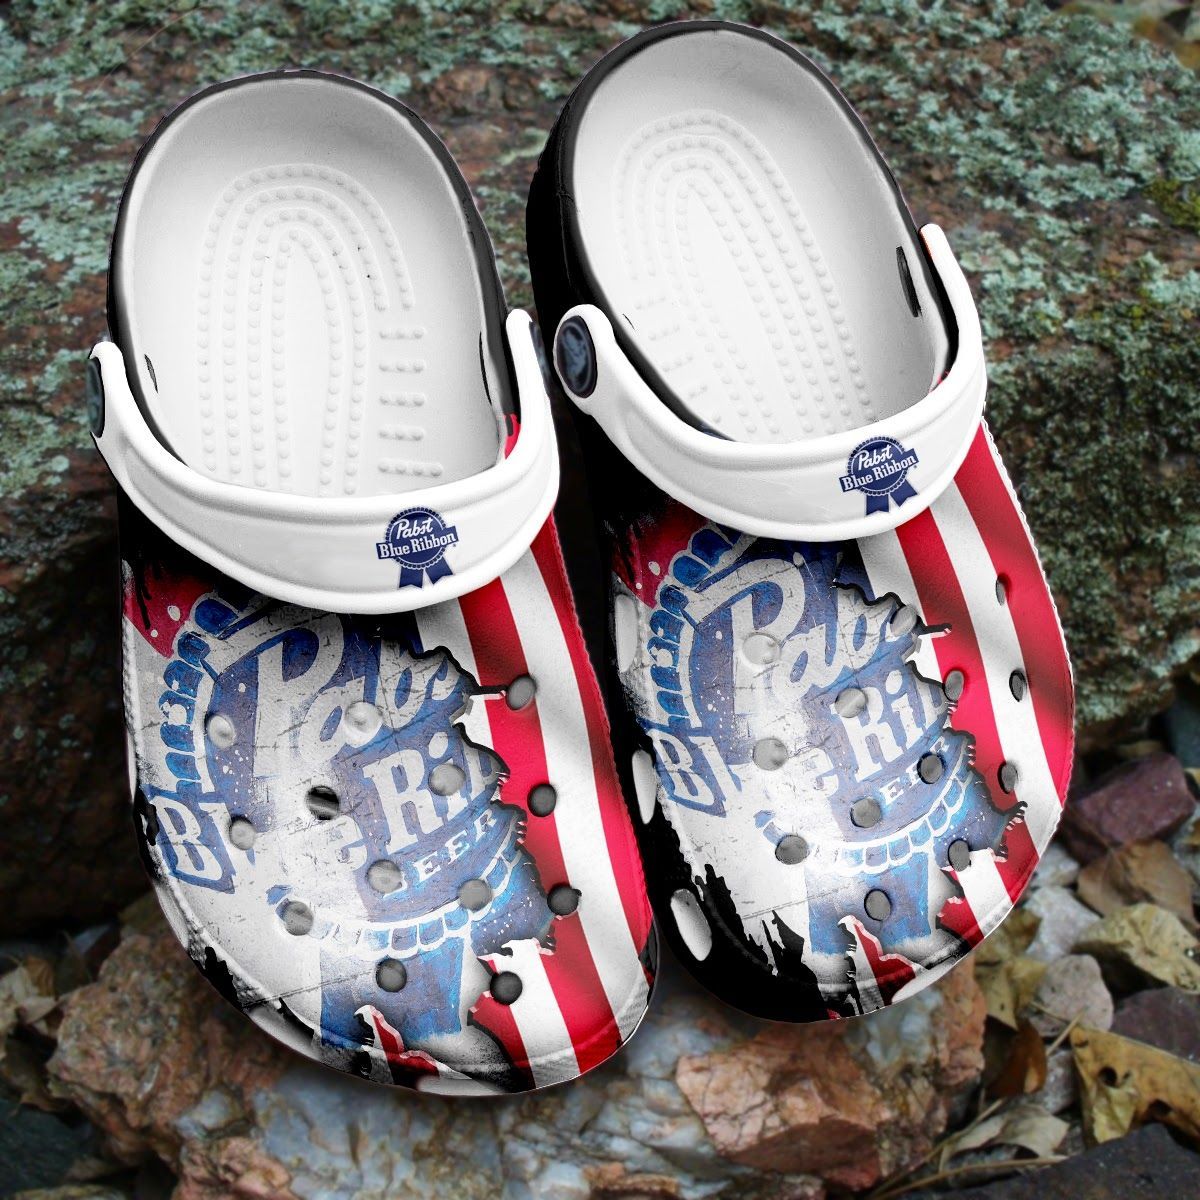 If you'd like to purchase a pair of Crocband Clogs, be sure to check out the official website. 124